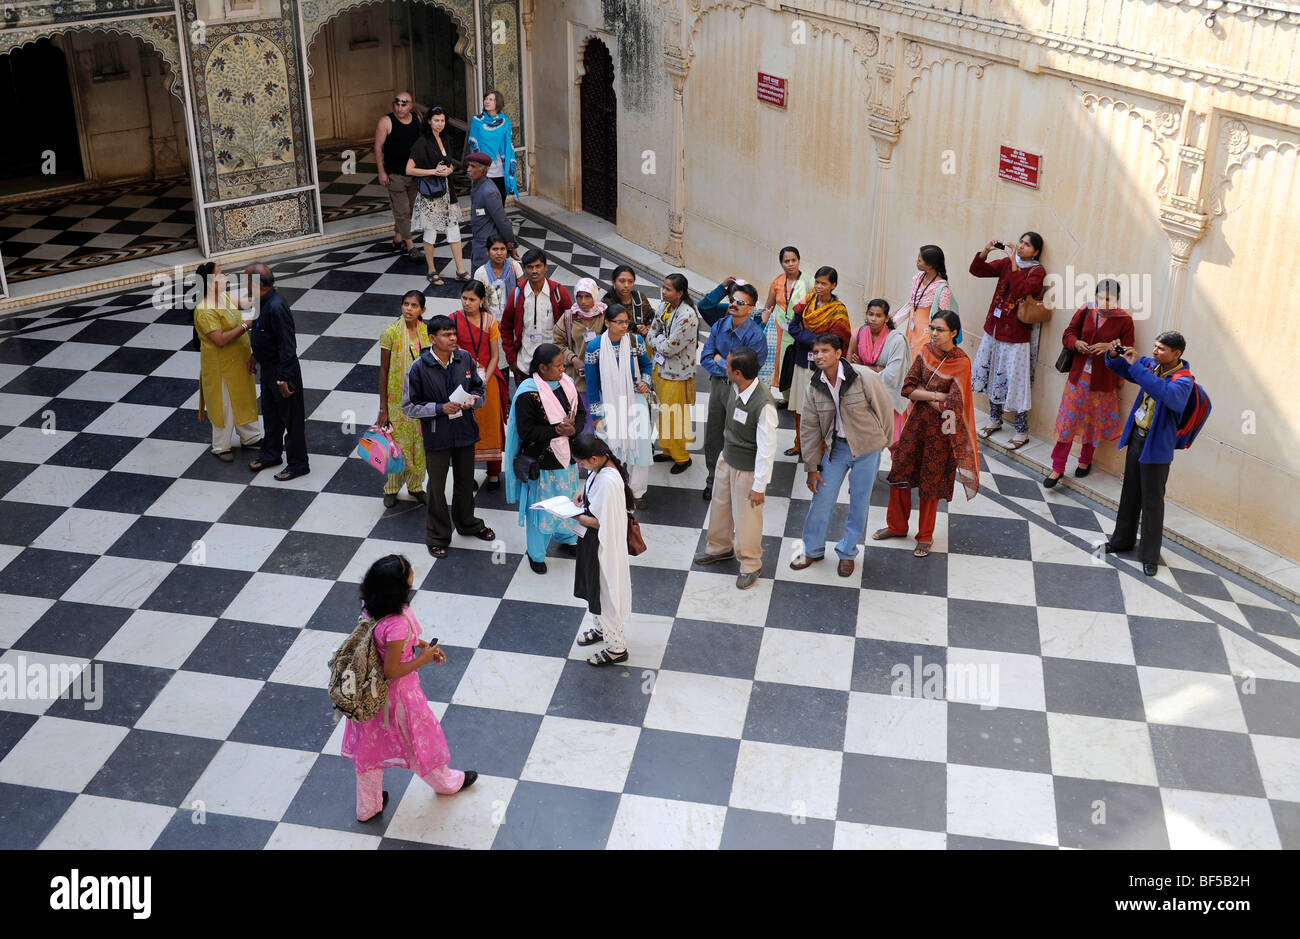 Indian group of visitors in the city palace, Udaipur, Rajasthan, North India, India, South Asia, Asia Stock Photo